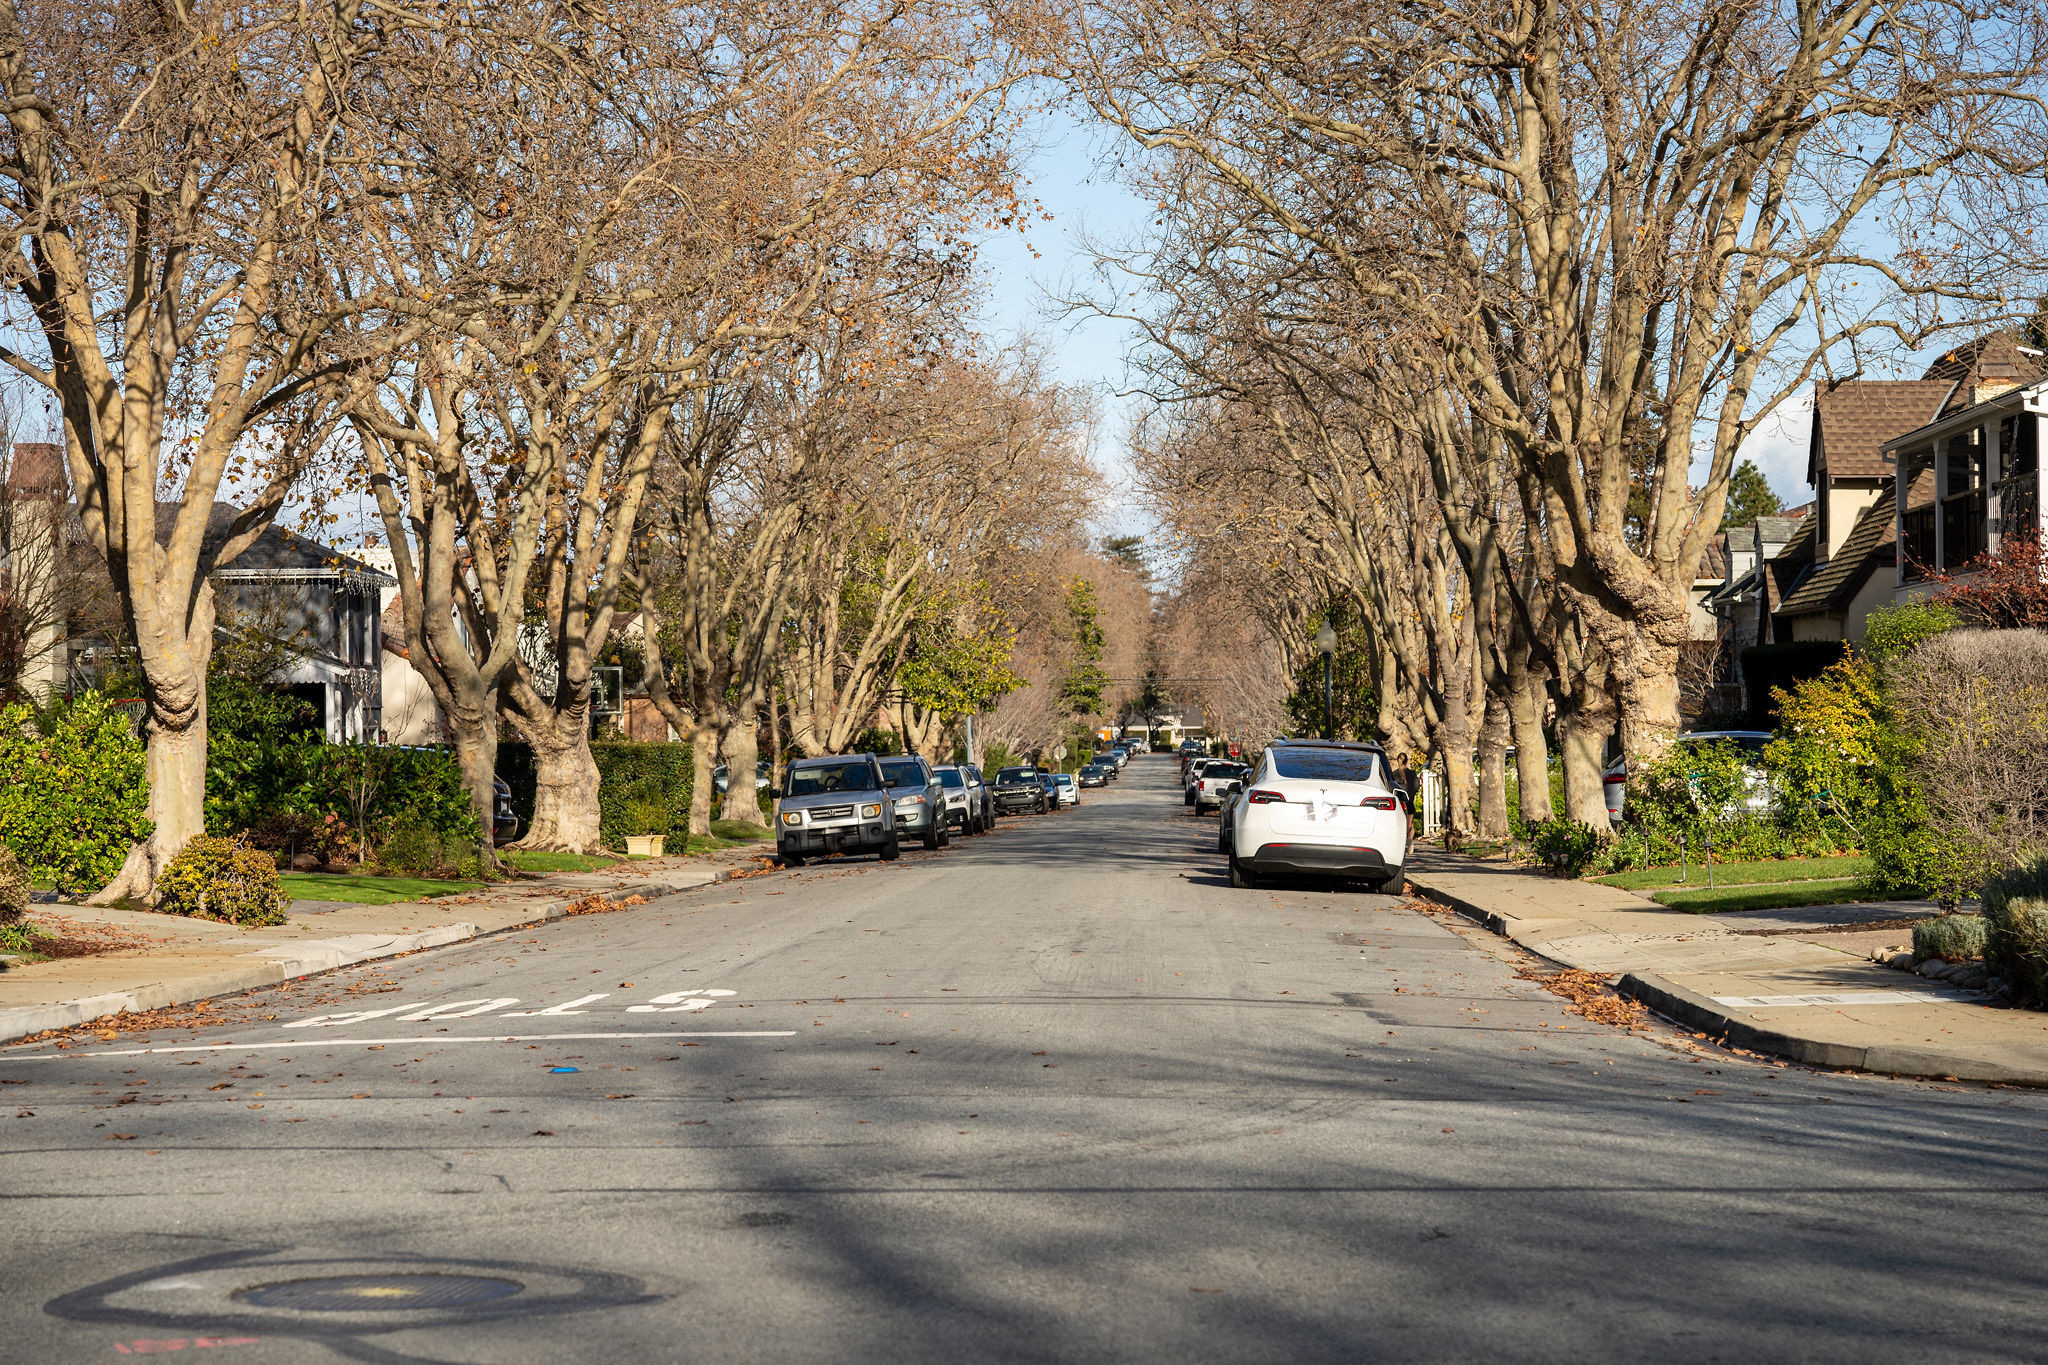 Aragon tree lined street with no leaves in San Mateo.